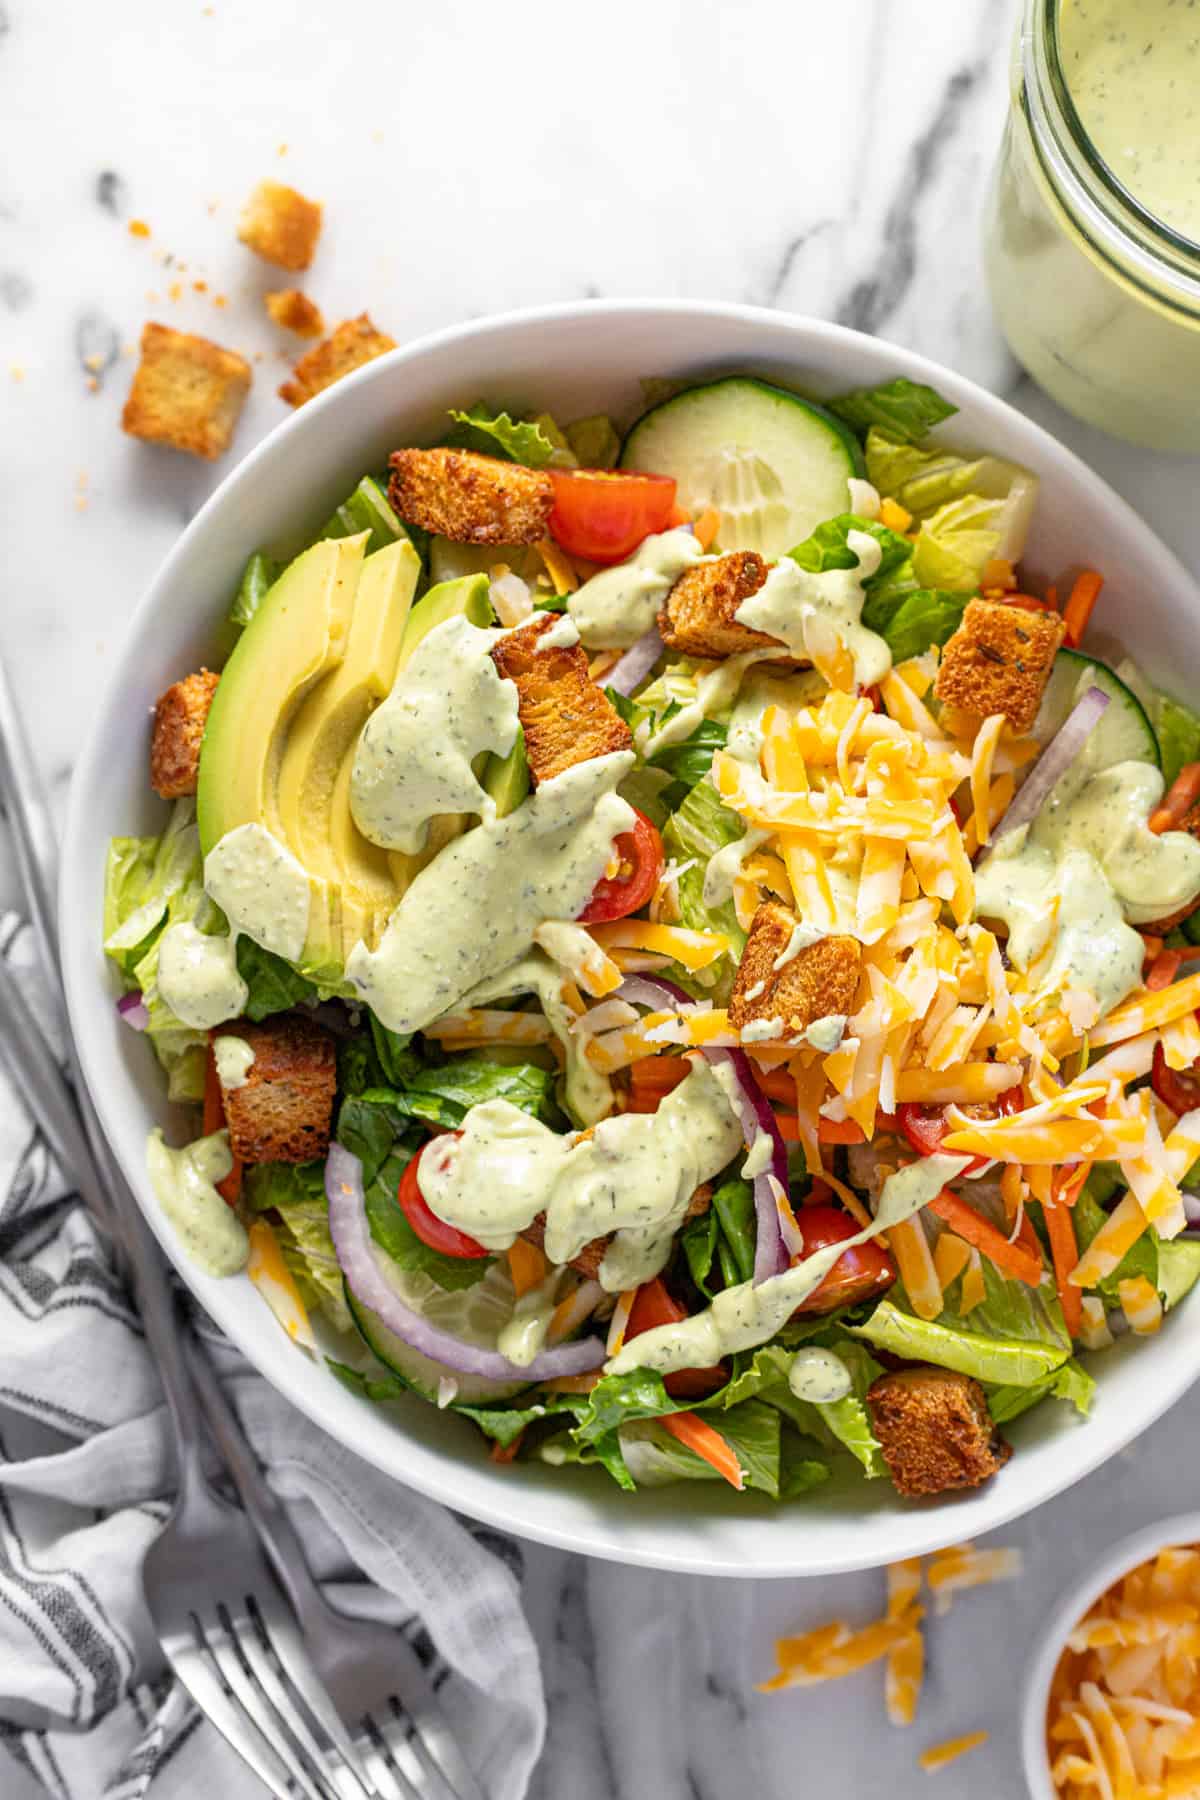 Big bowl filled with greens, veggies, cheese, and croutons, drizzled with creamy dressing.